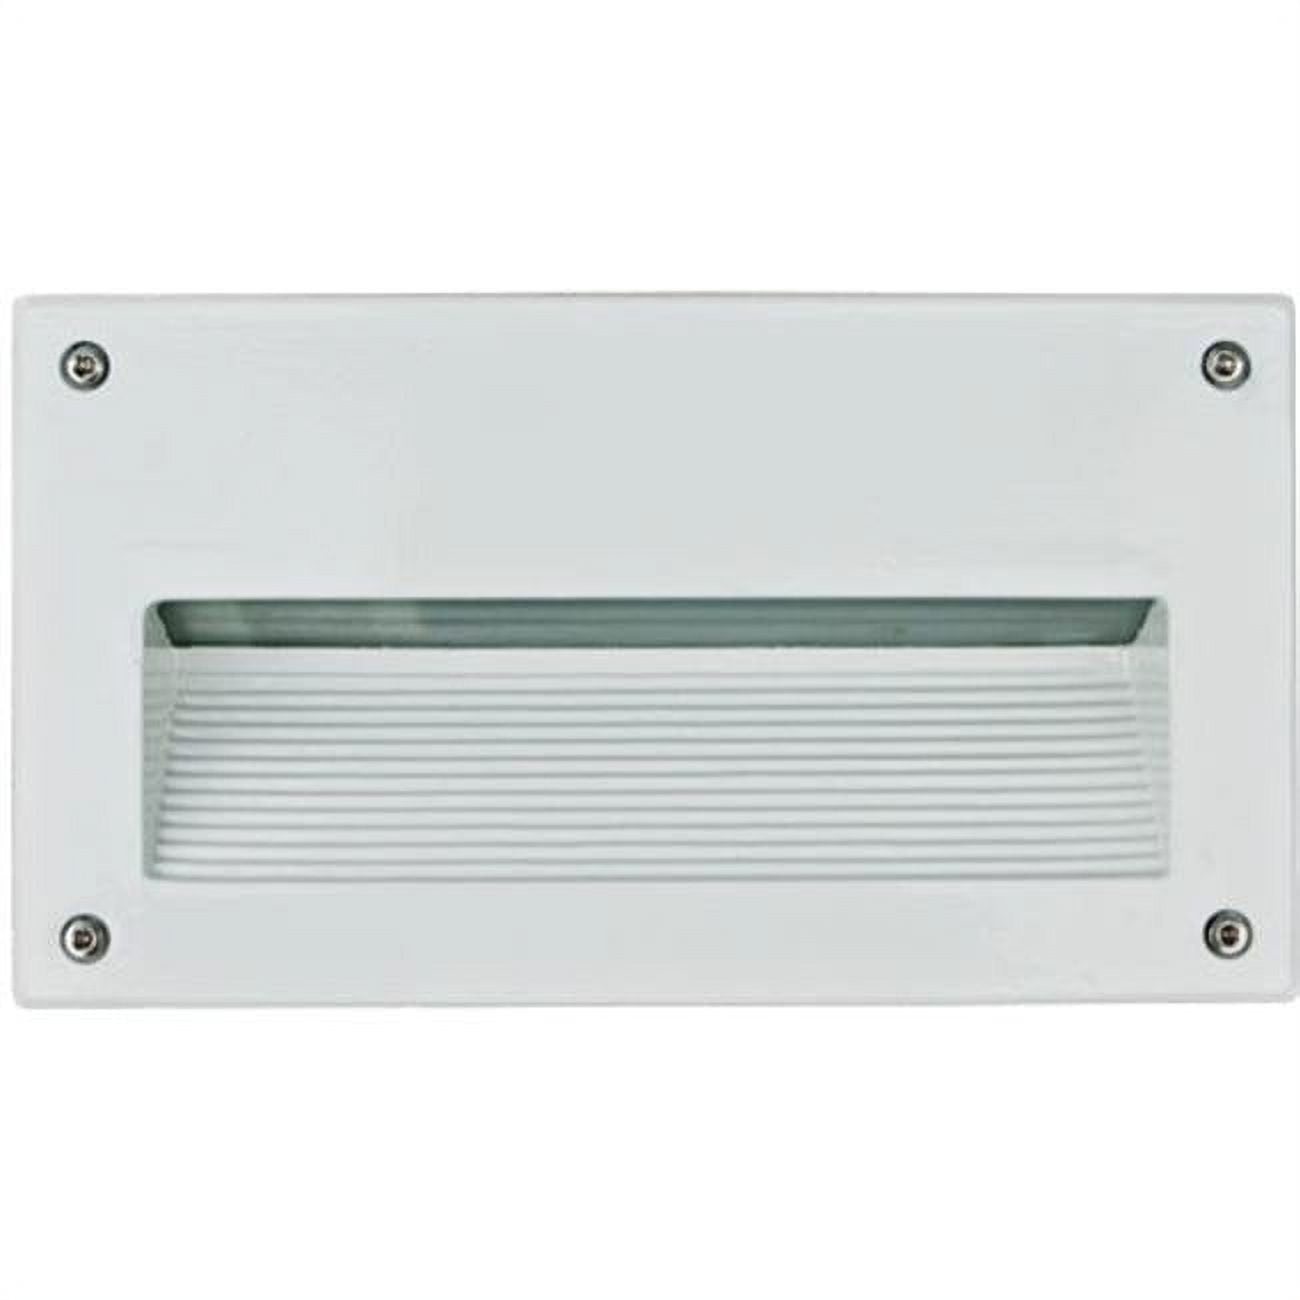 Picture of Dabmar Lighting DSL1003-W Recessed Brick, Step & Wall Light, White - 4.95 x 8.80 x 2.90 in.